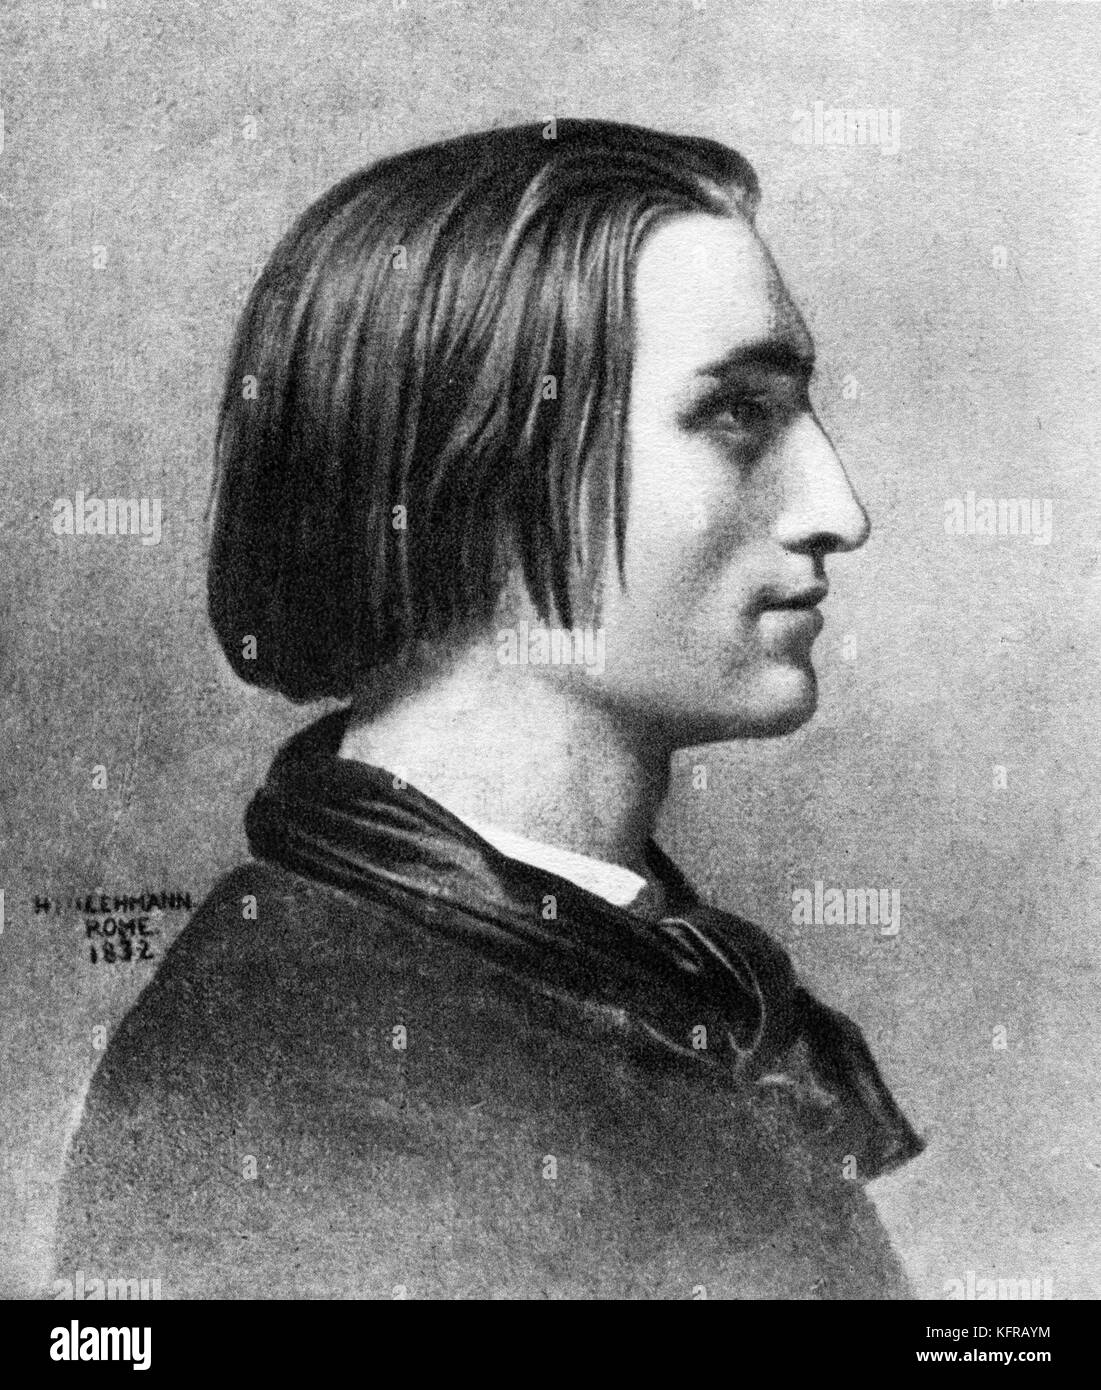 Franz Liszt - after portrait by Henri Lehmann, c. 1839, Rome, Italy. Hungarian pianist and composer,  22 October 1811 - 31 July 1886. Stock Photo